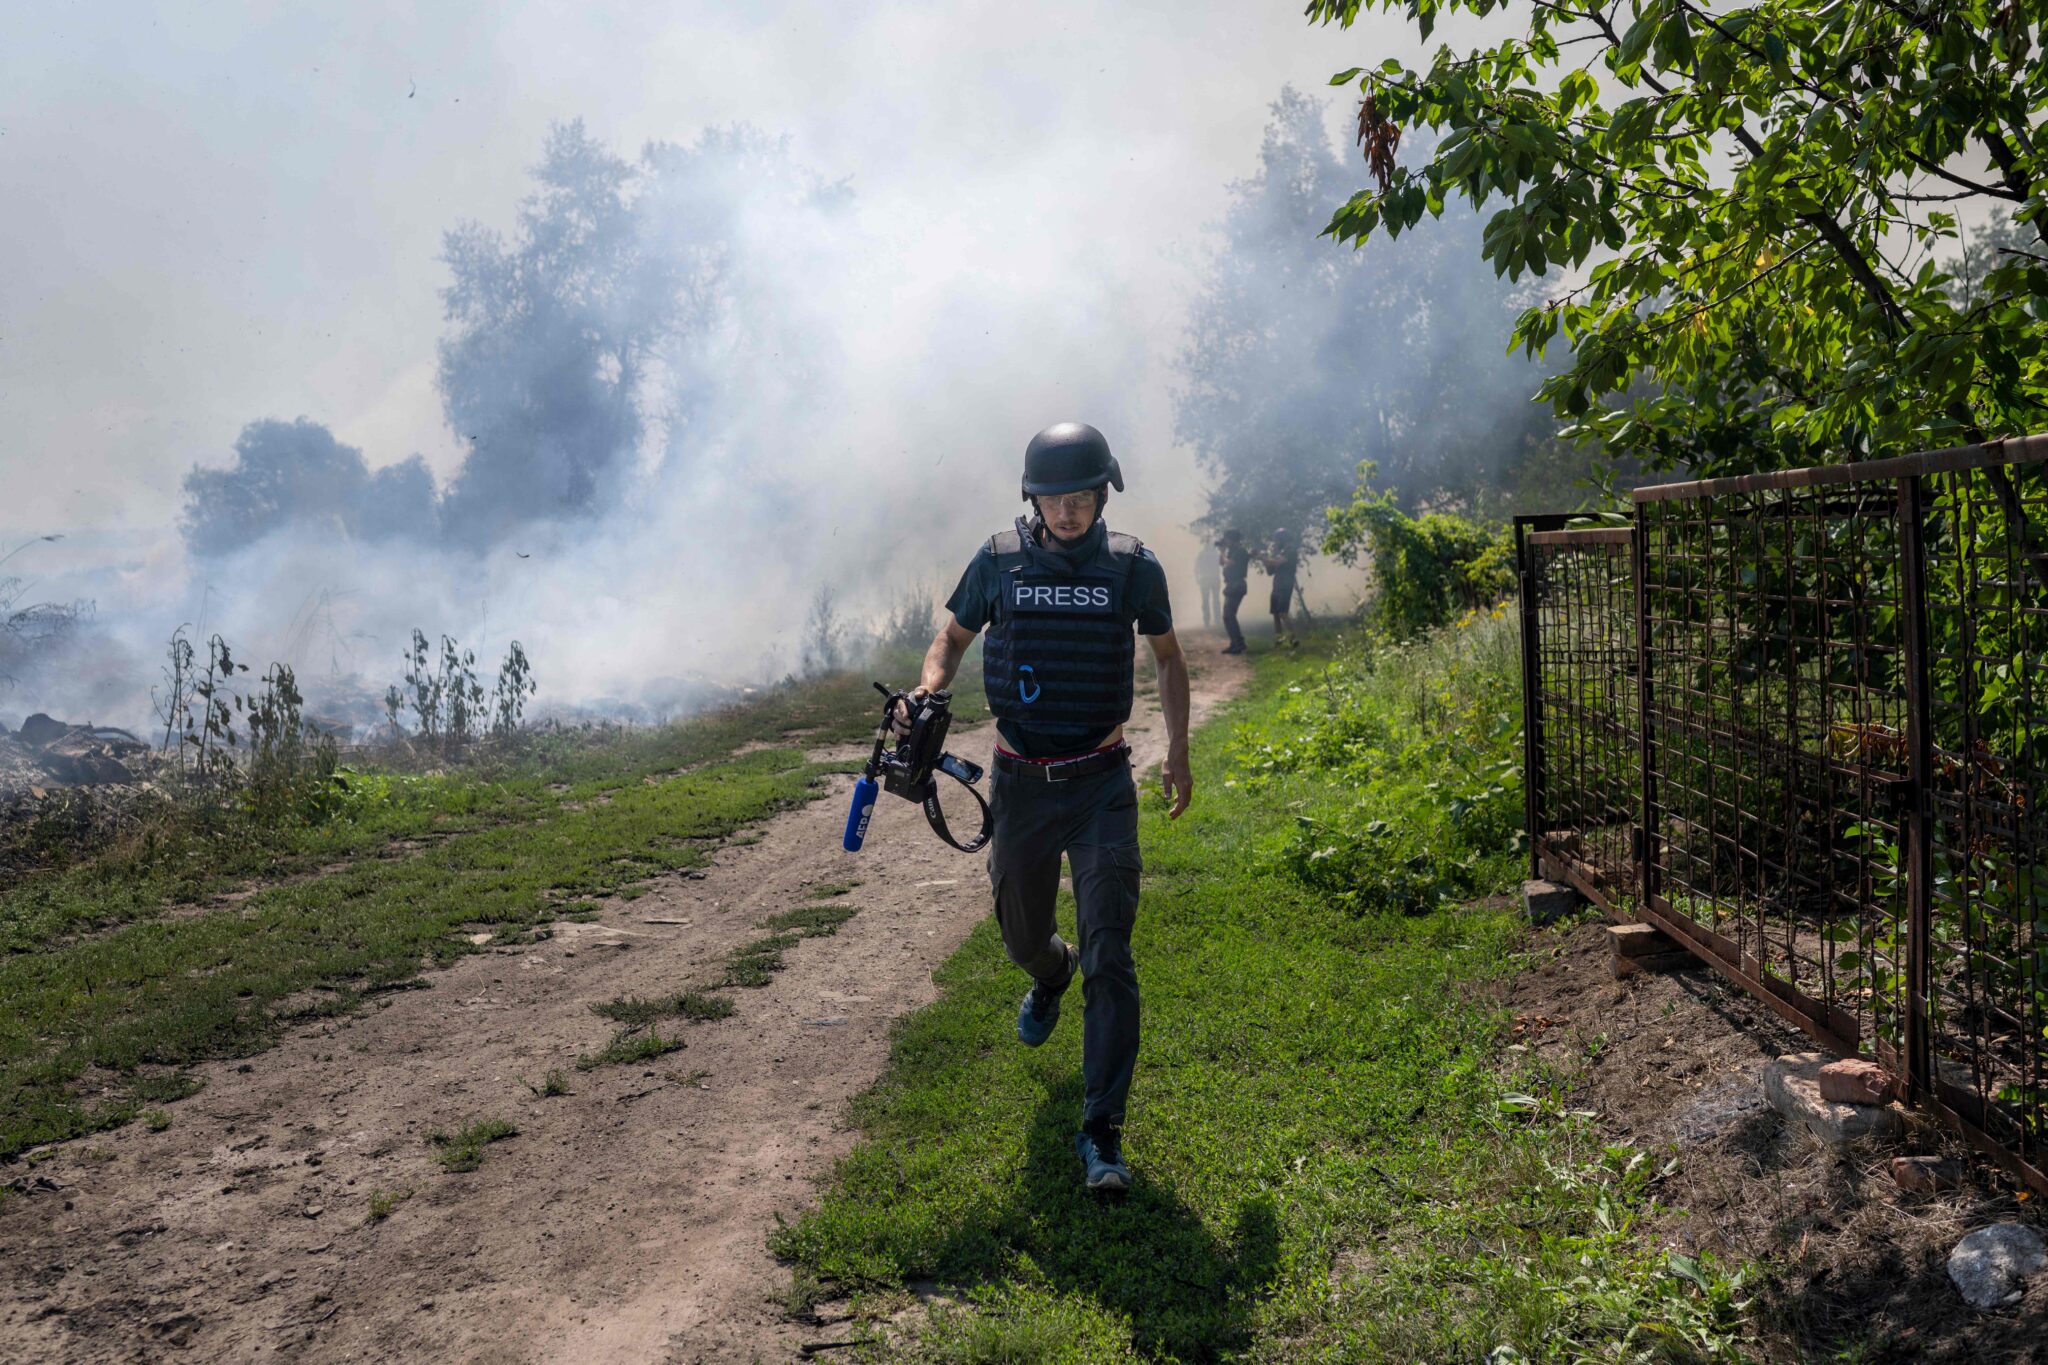 An AFP journalist runs as smoke rises behind after a bombardment in Bakhmut, Eastern Ukraine, on July 31, 2022. (Photo by BULENT KILIC / AFP) (Photo by BULENT KILIC/AFP via Getty Images)